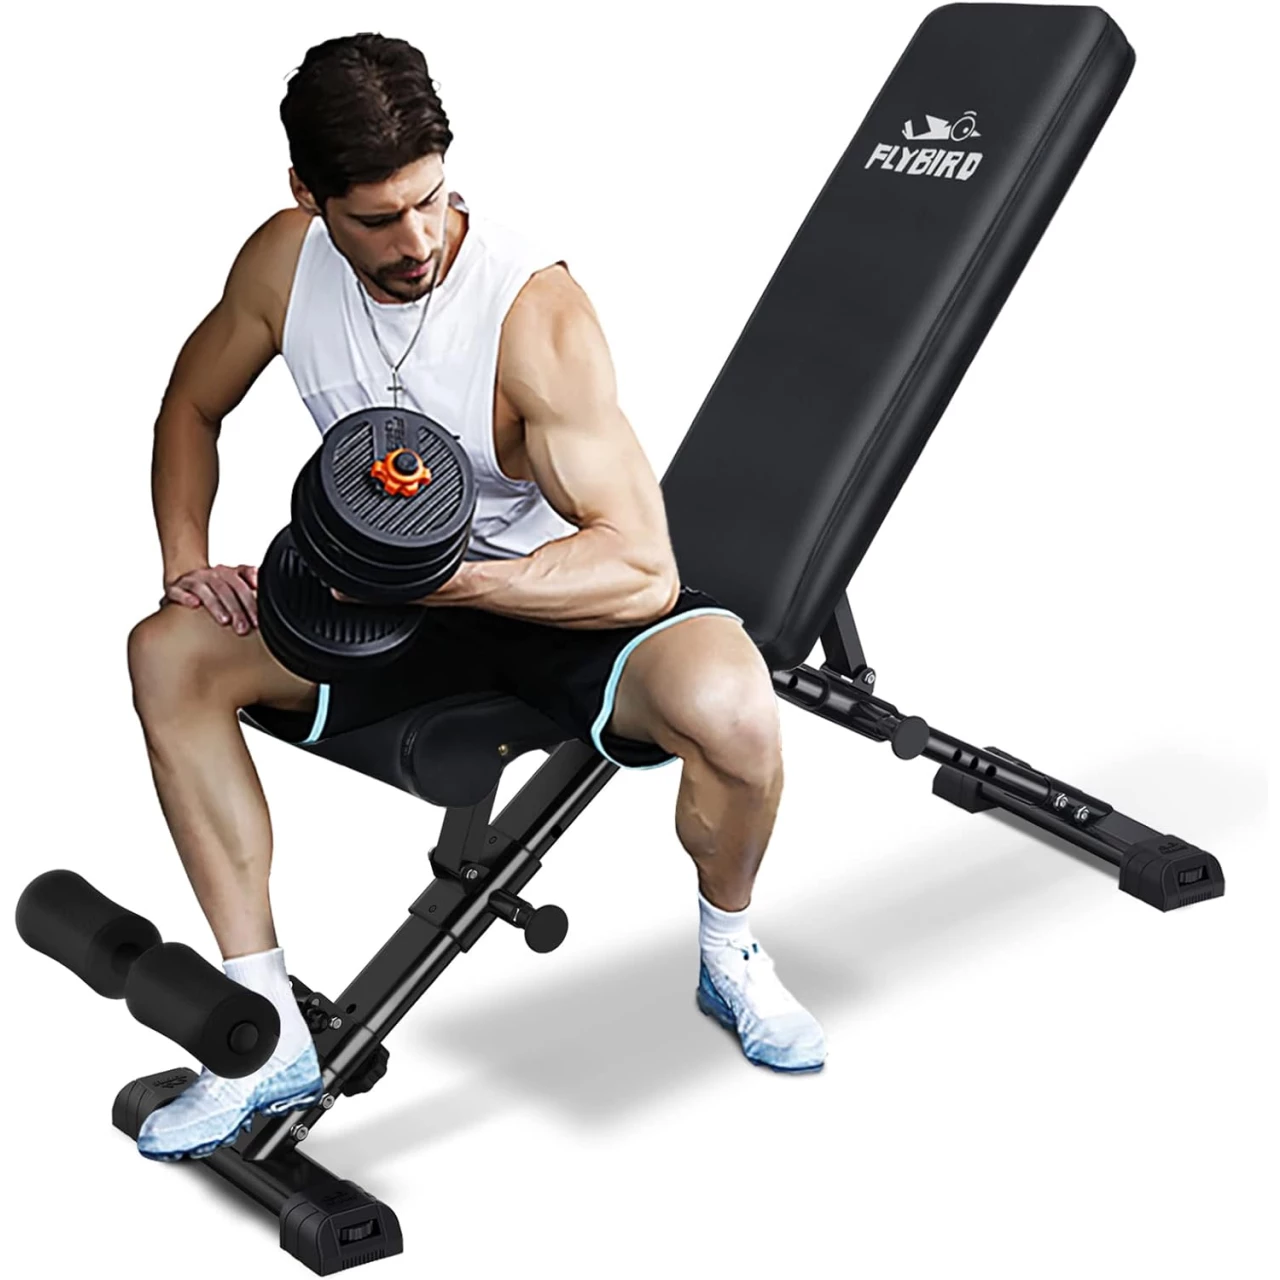 FLYBIRD Weight Bench, Adjustable Strength Training Bench for Full Body Workout